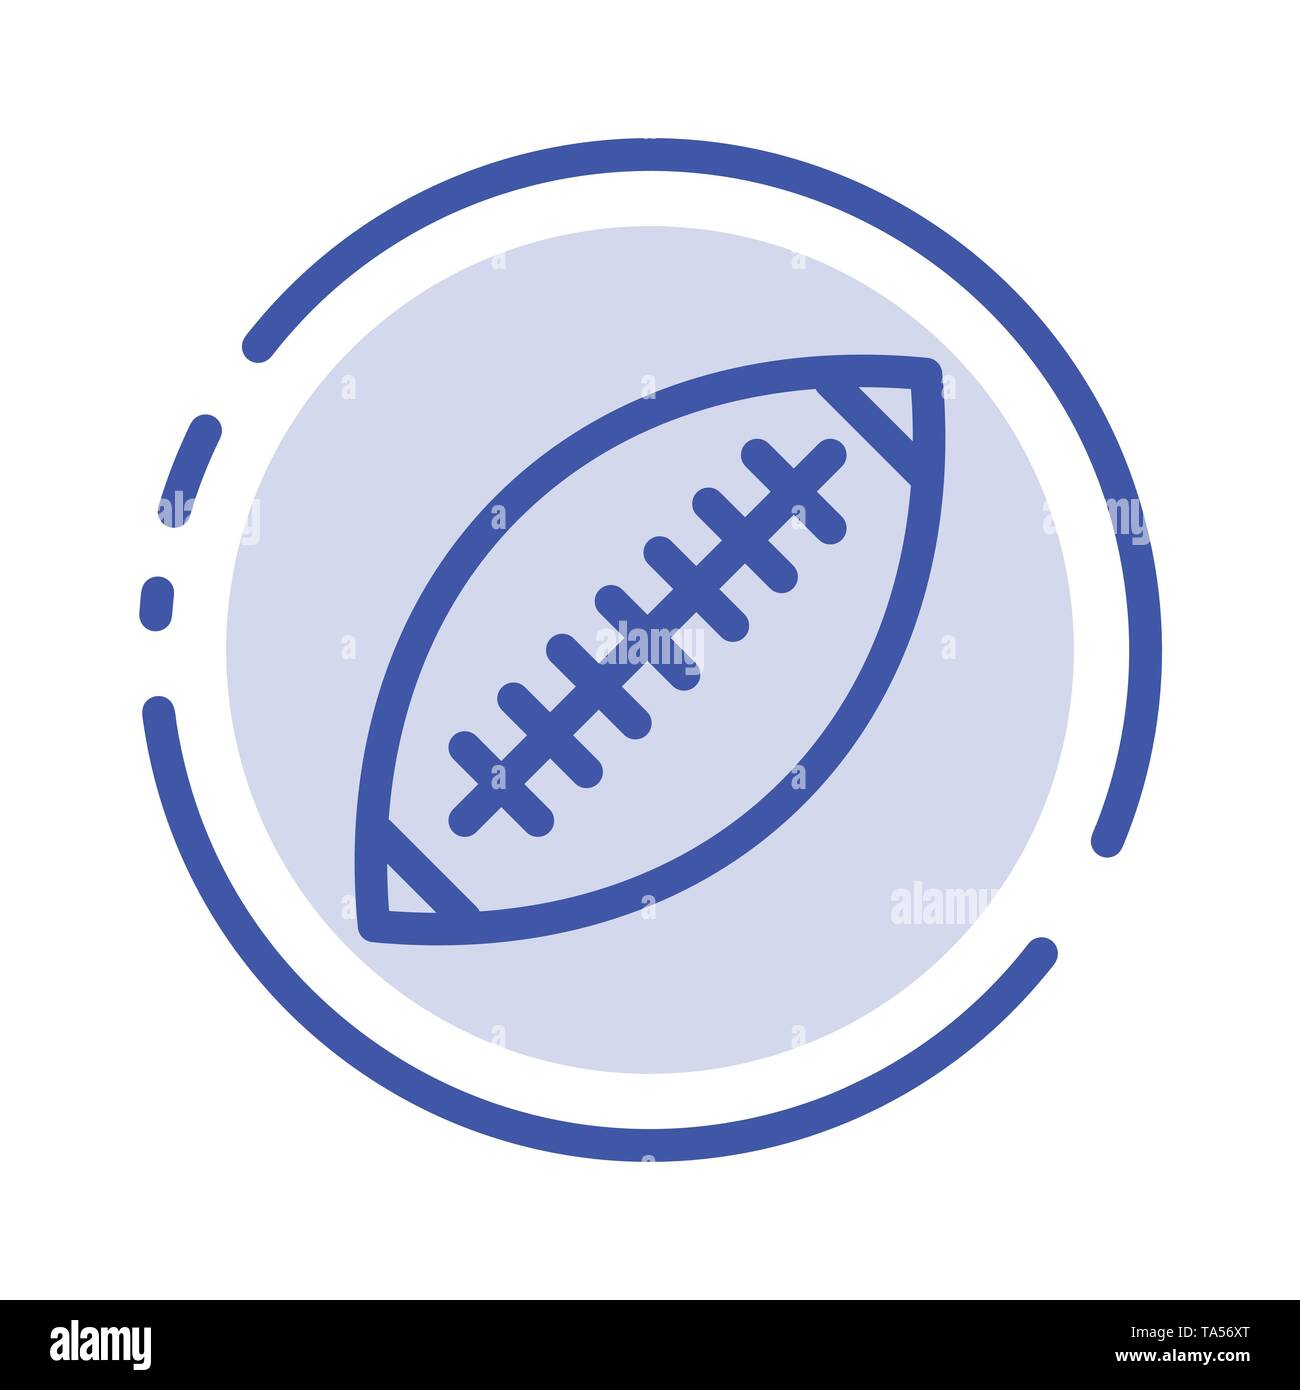 Afl, Australia, Football, Rugby, Rugby Ball, Sport, Sydney Blue Dotted Line Line Icon Stock Vector